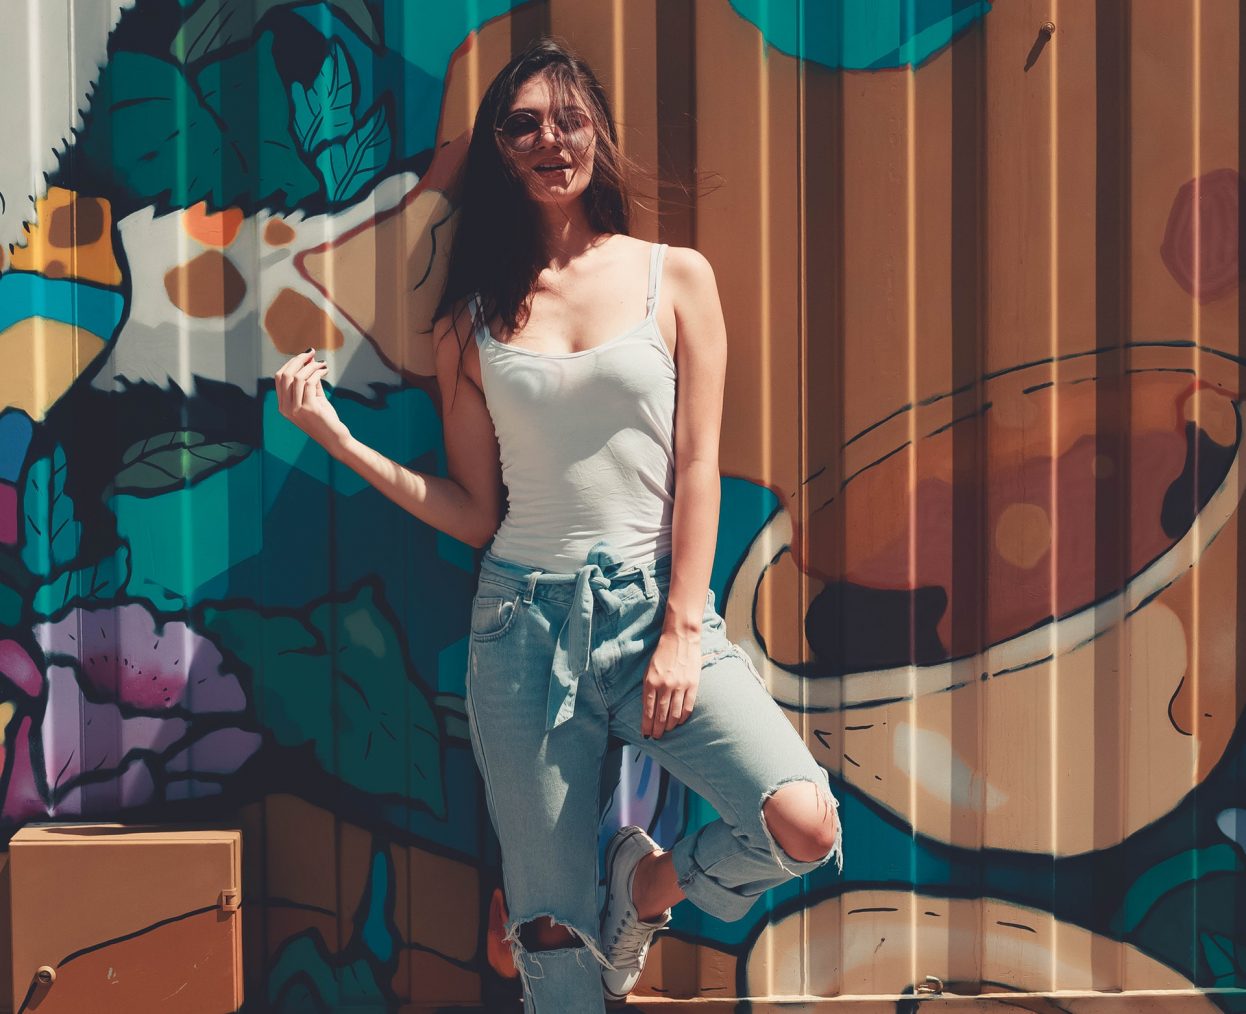 Woman Wearing Gray Tank Top Leaning on Wall With Graffiti